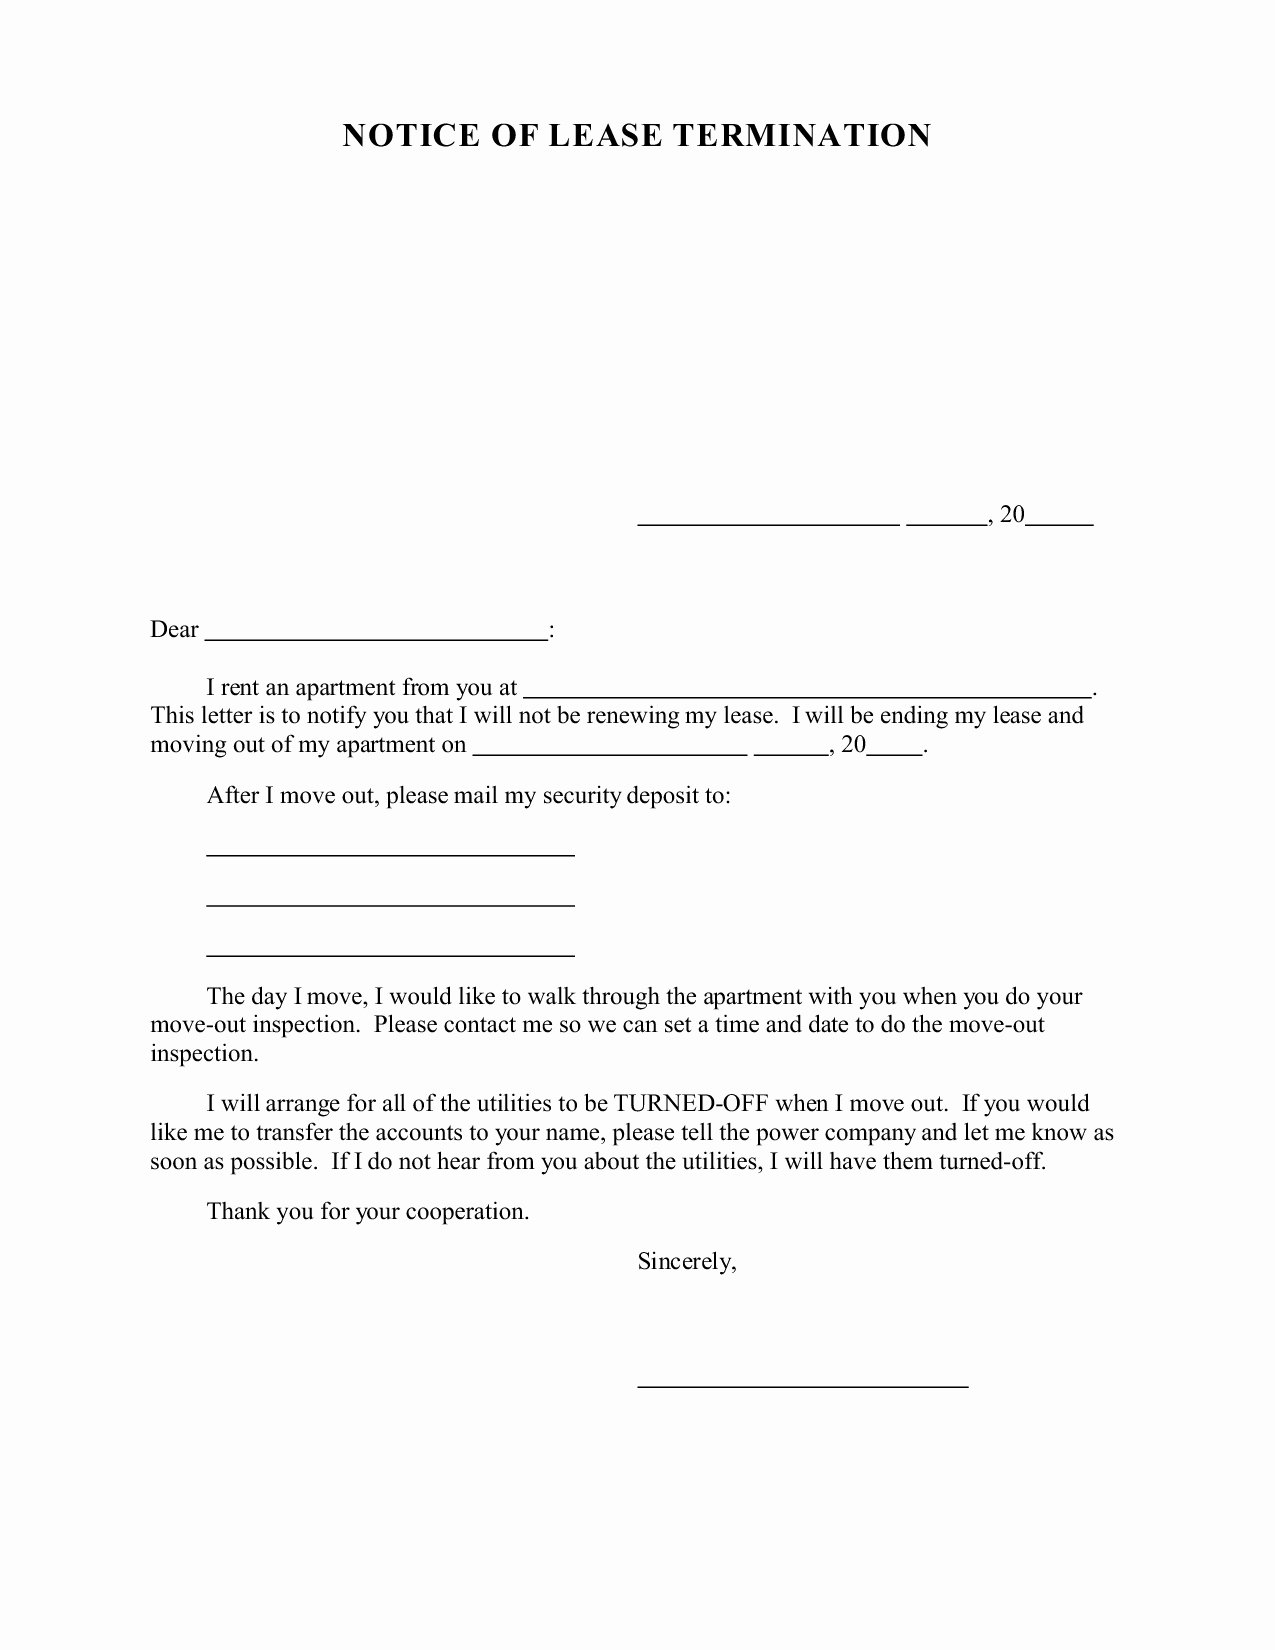 Letter for Not Renewing Lease Lovely Letter Not Renewing Lease Free Printable Documents